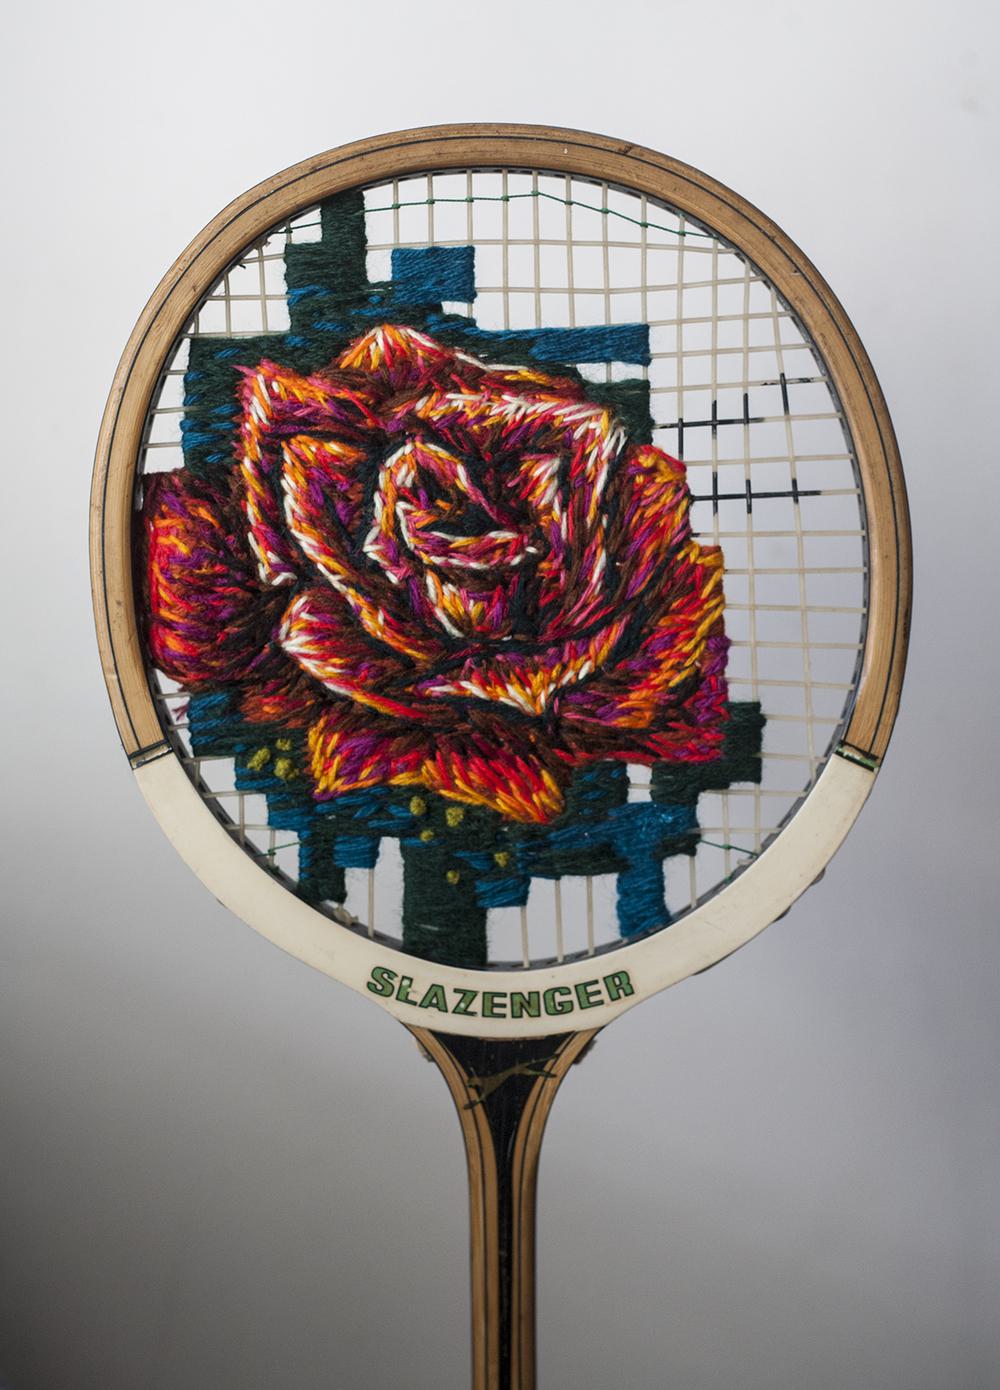 Embroidery_by_Danielle_Clough